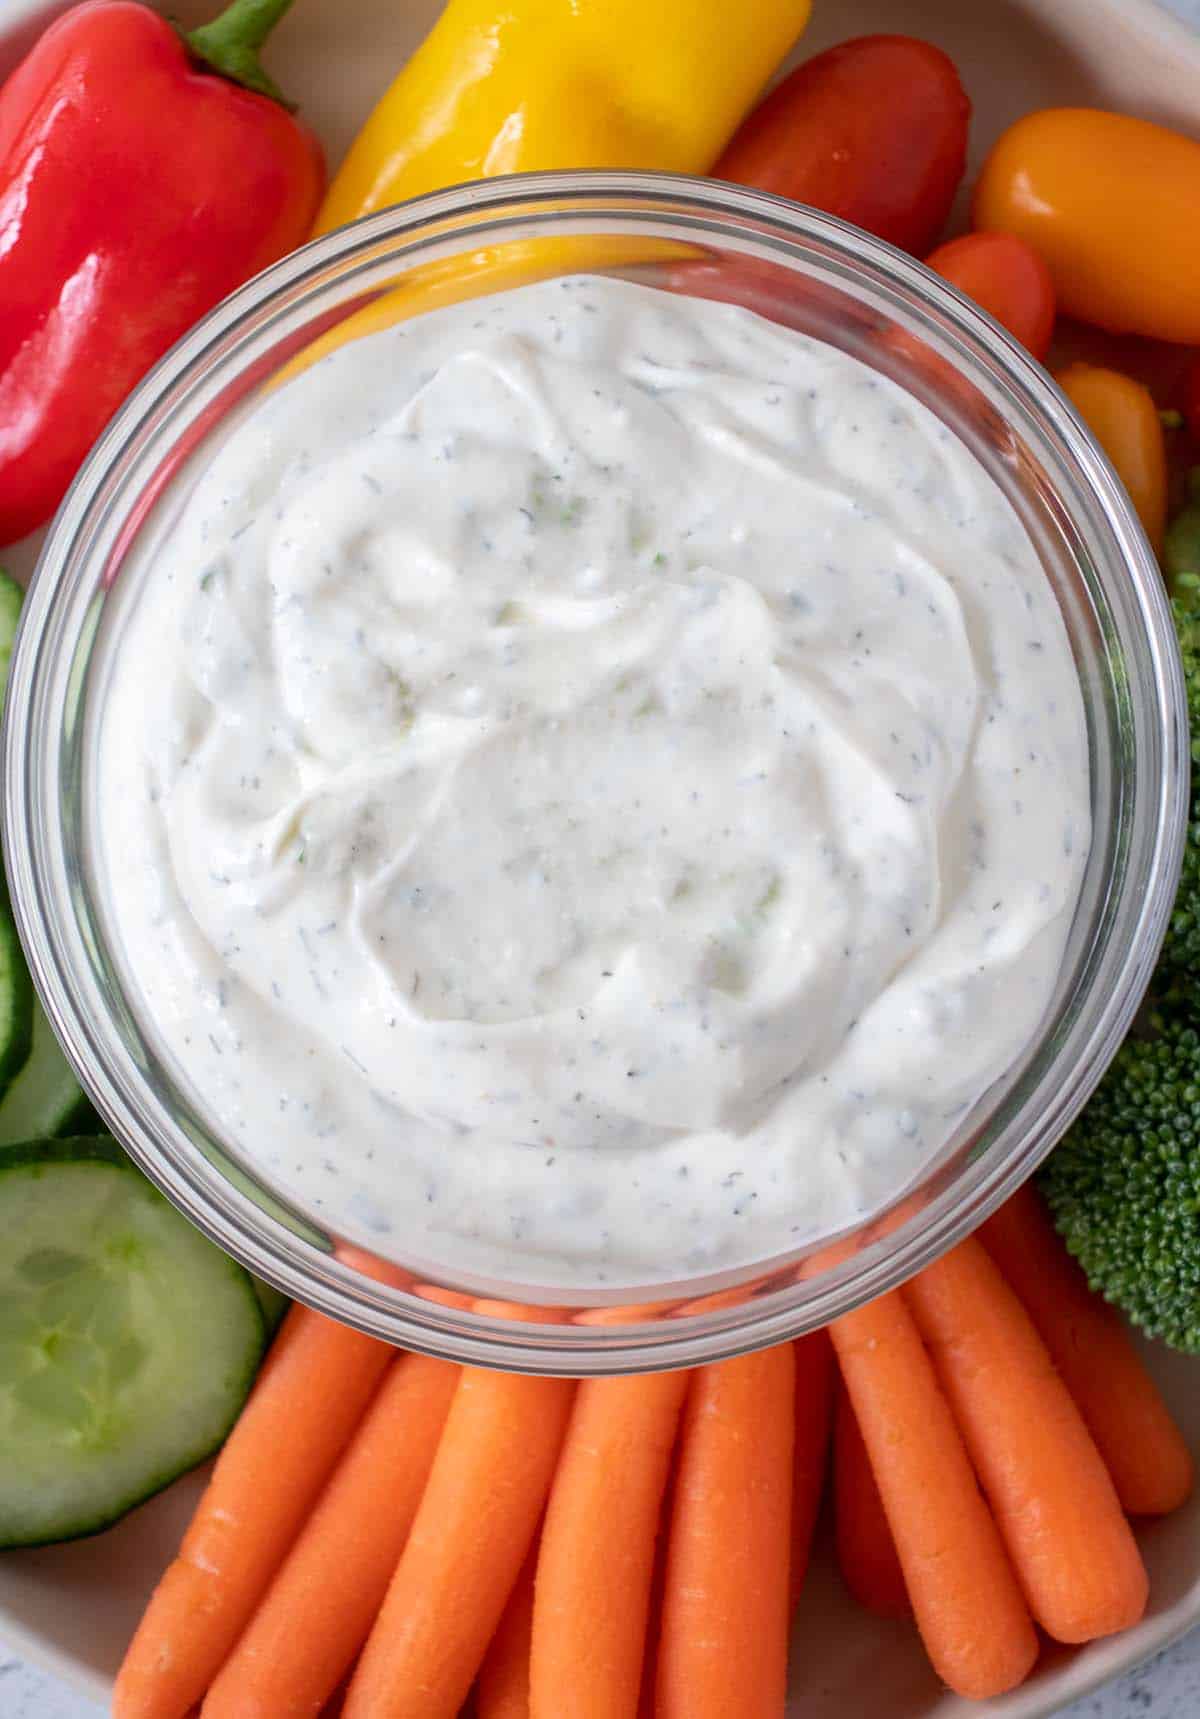 Homemade ranch dip in a clear glass bowl on a plate of veggies.